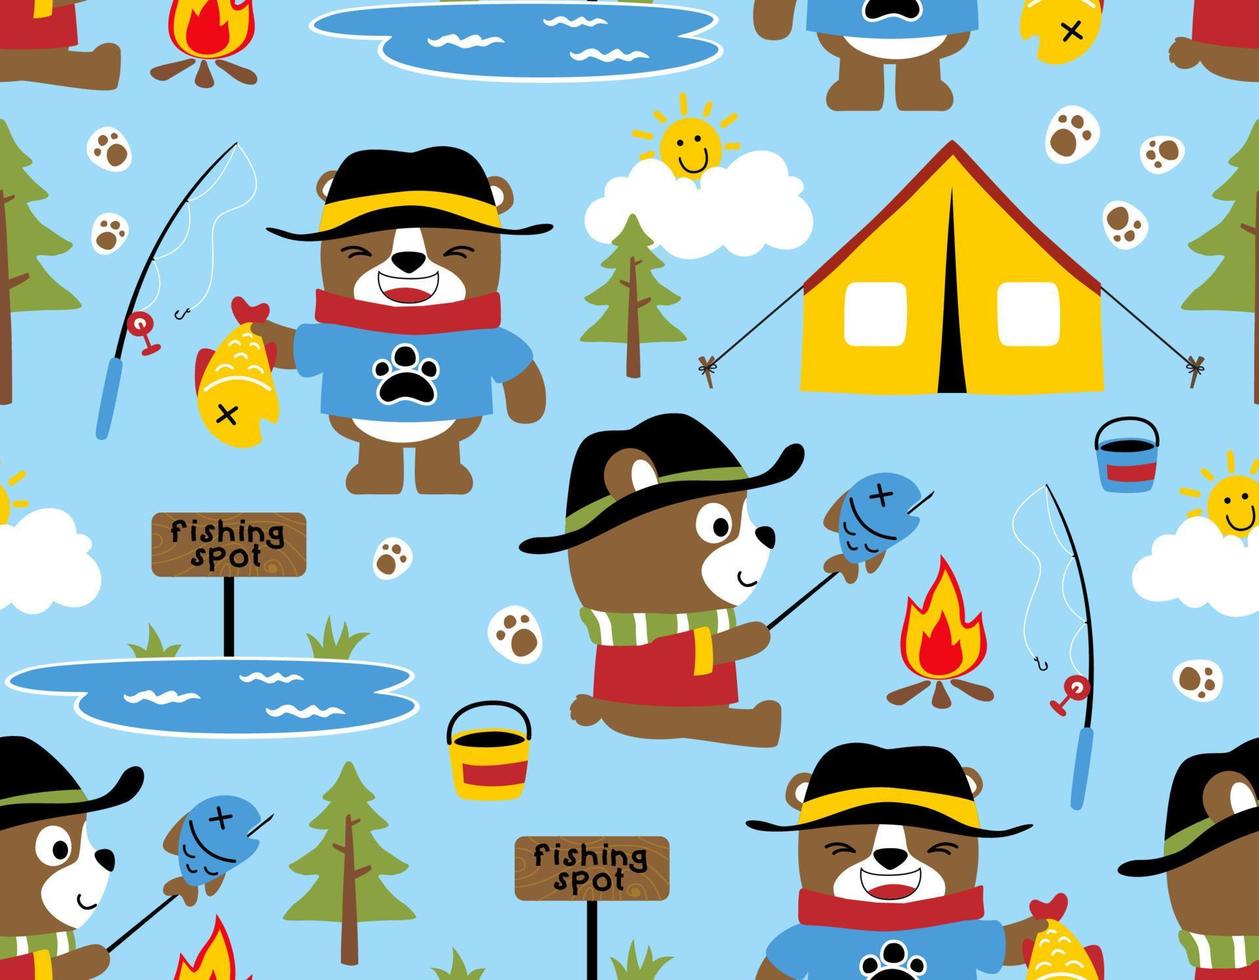 Seamless pattern vector of cute bear cartoon camping in forest, camping elements